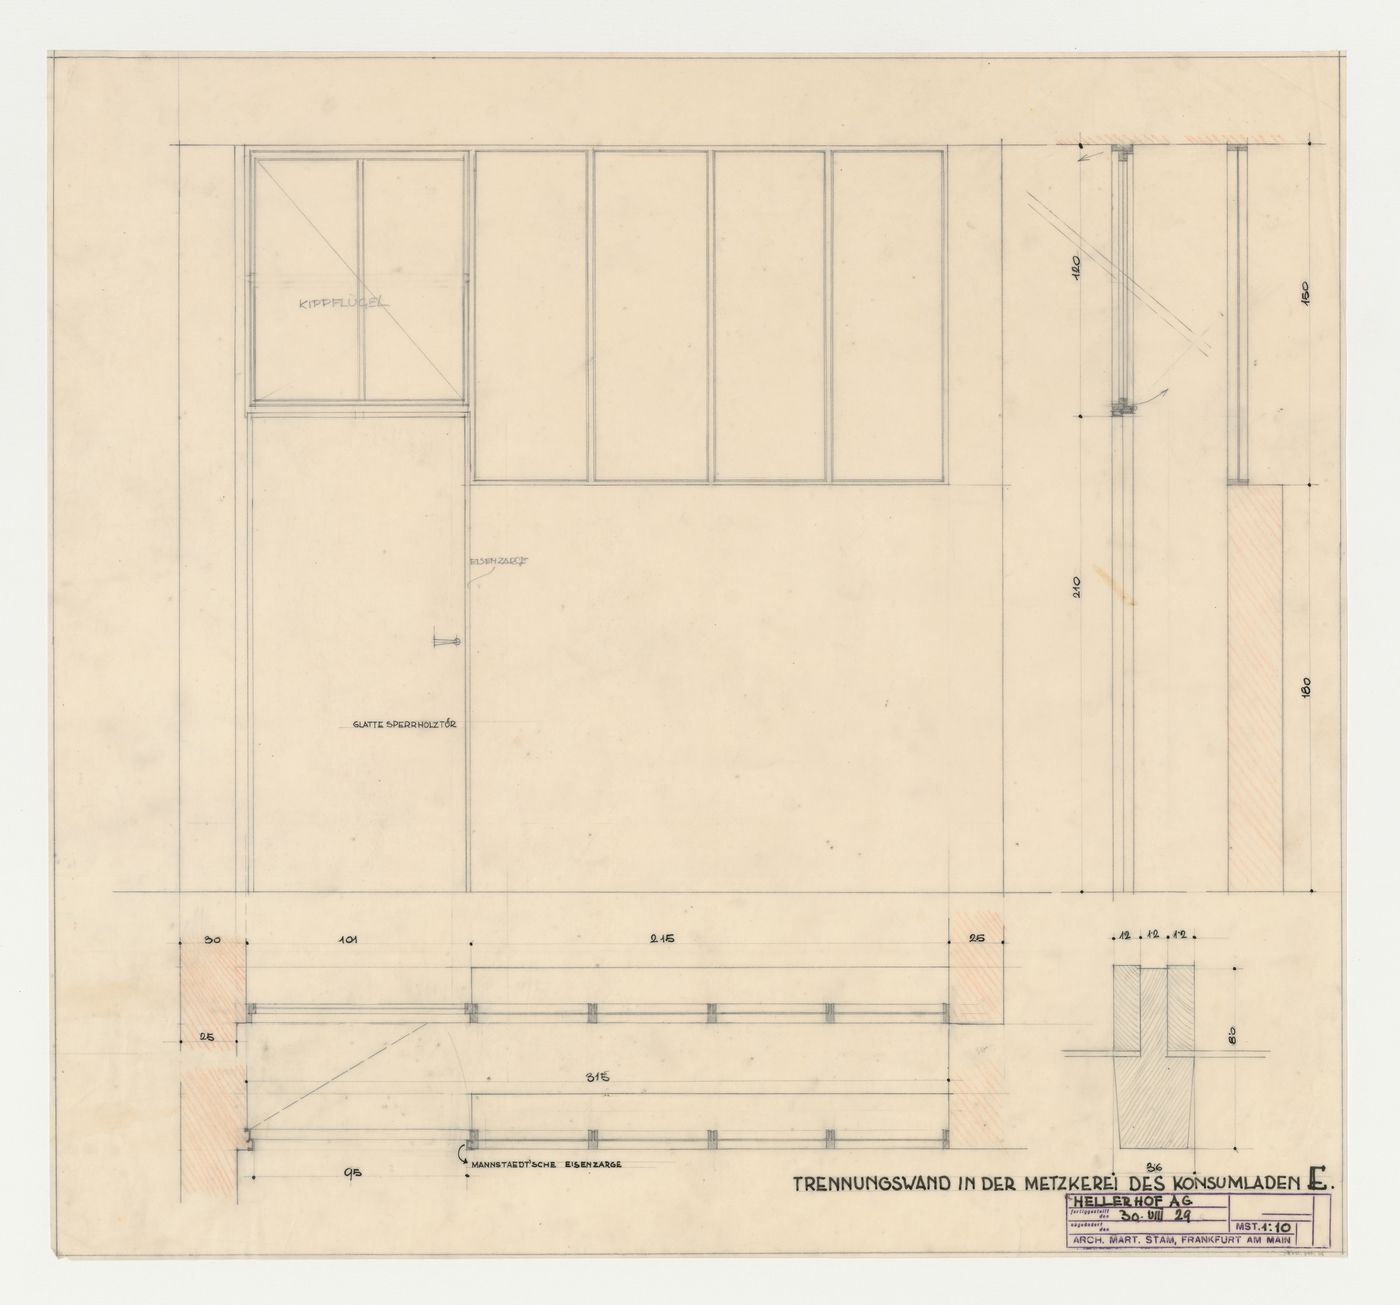 Elevation, plan, and sections for a partition wall in the meat section of a type E store, Hellerhof Housing Estate, Frankfurt am Main, Germany